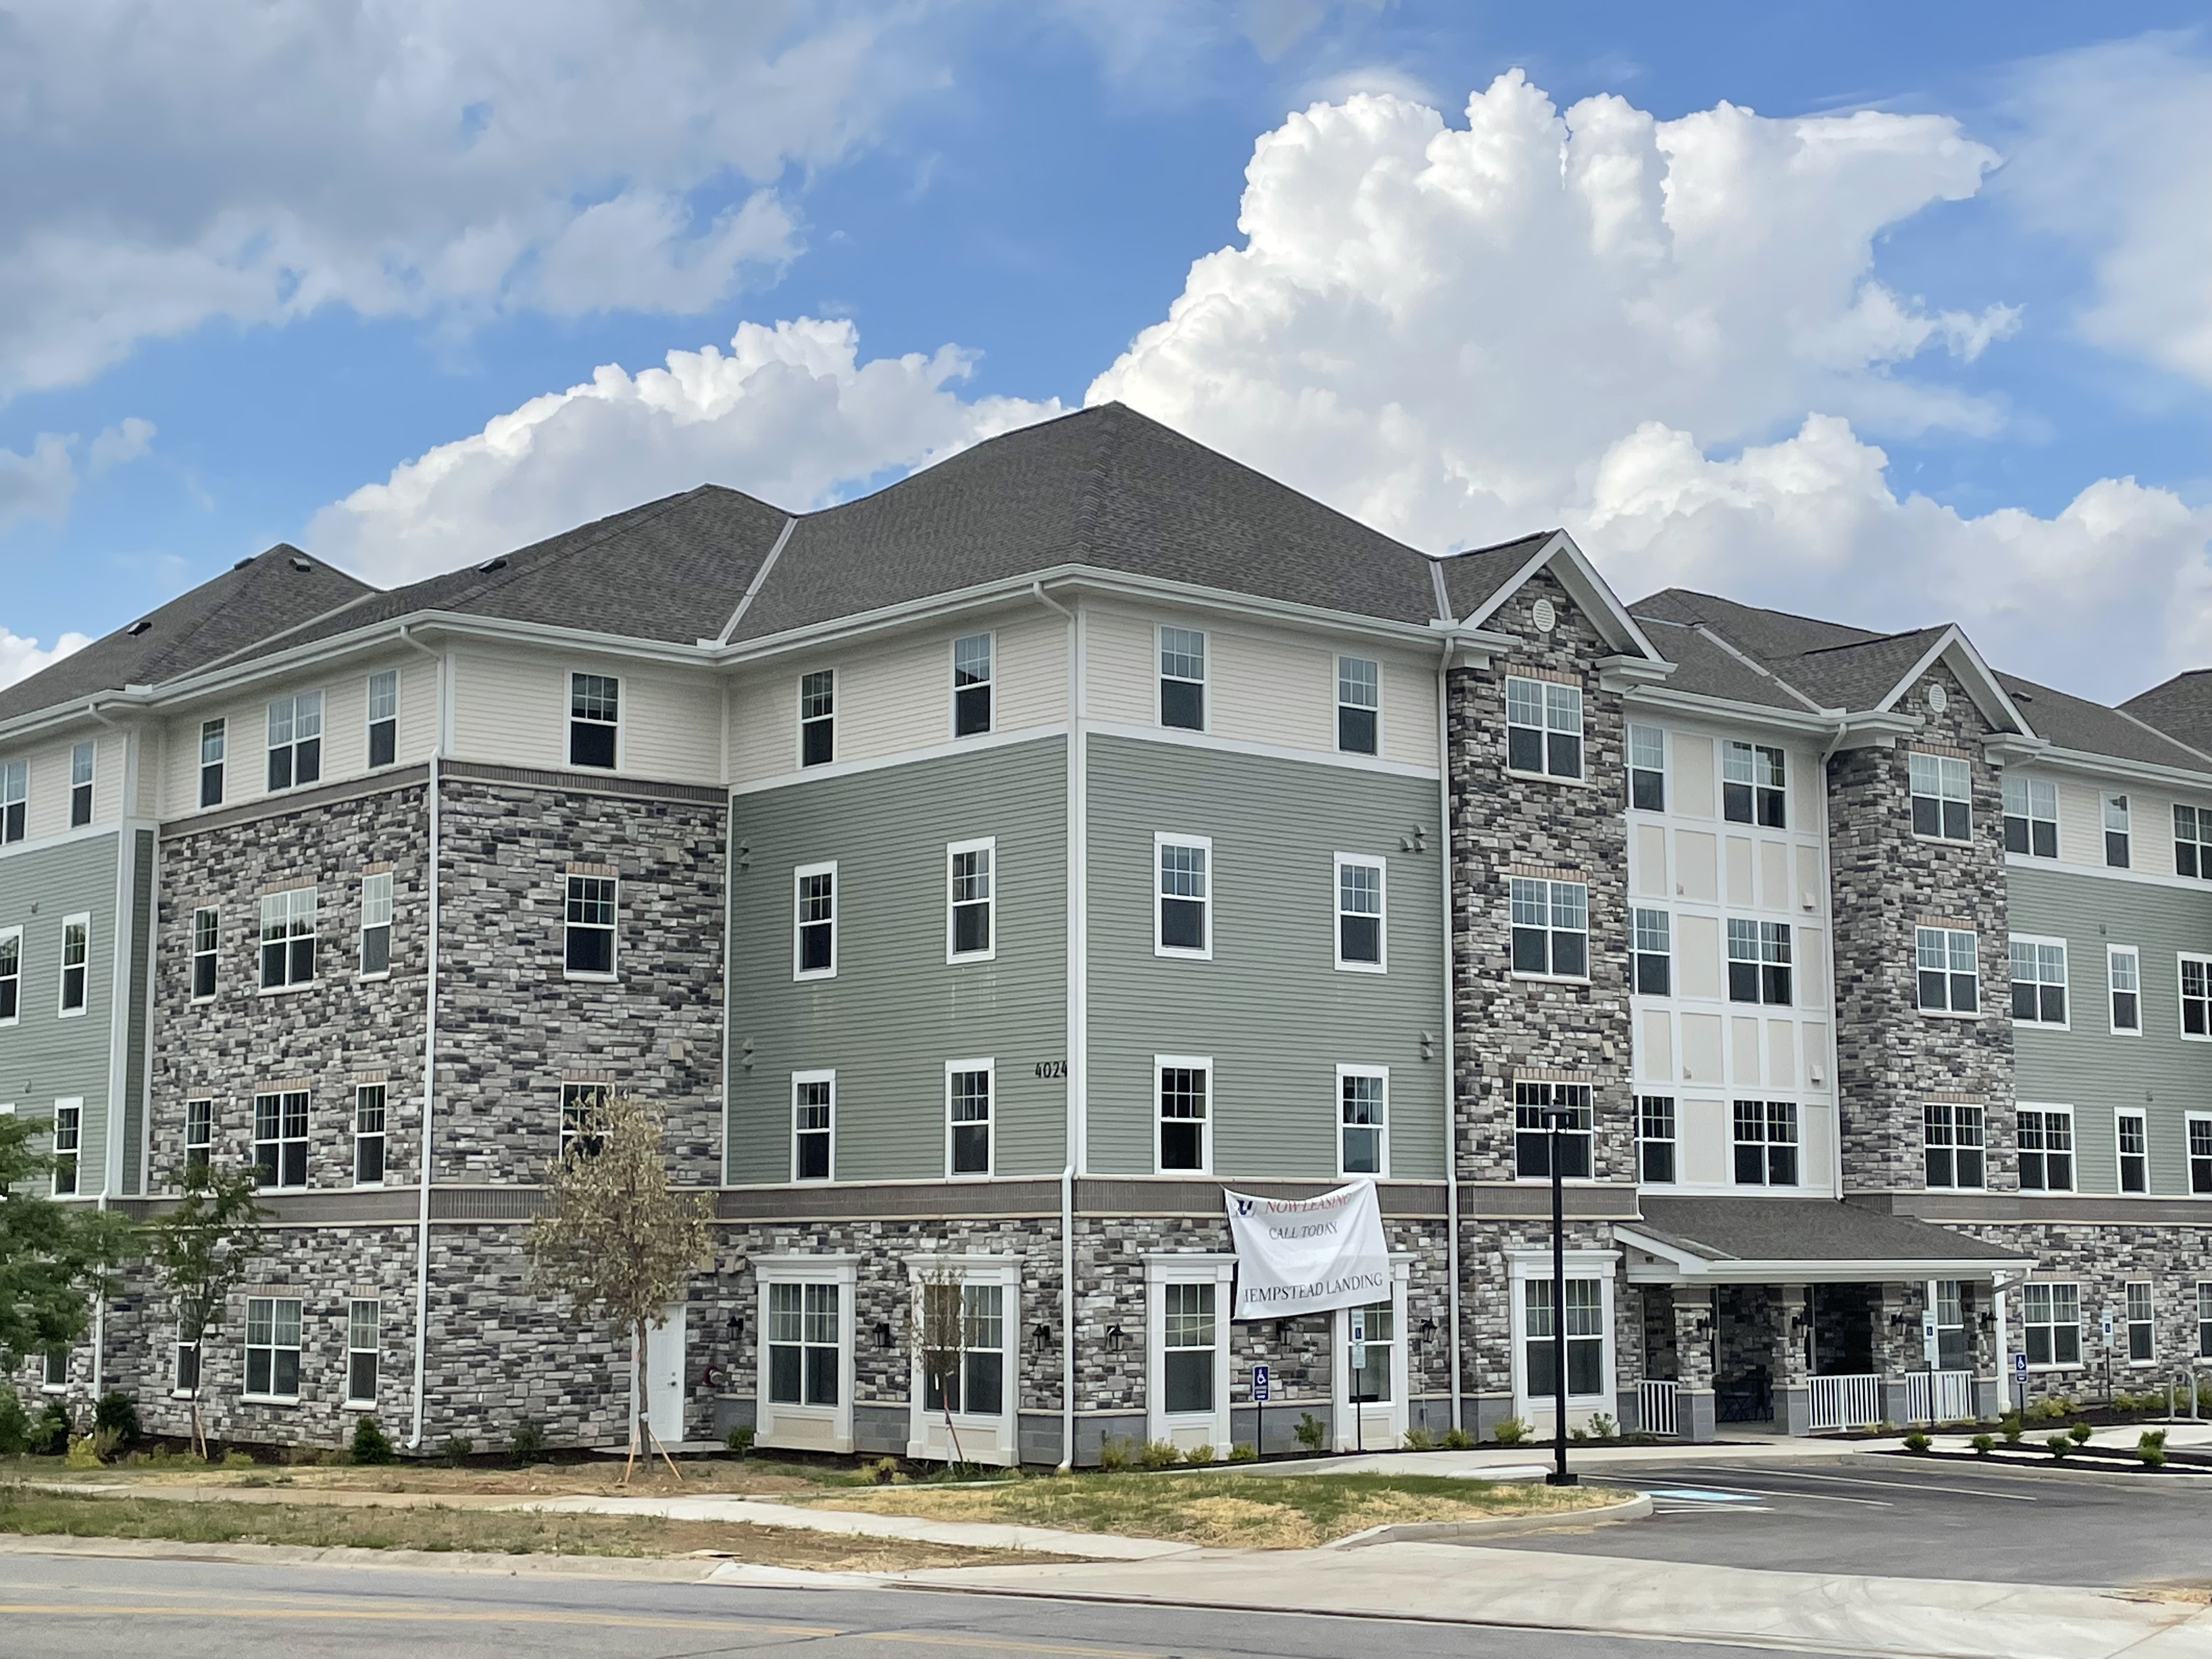 Hempstead Landing is a 40-unit, Spire Development apartment complex planned to open this year. It is located just northwest of Meijer, next to a post office branch. NICK BLIZZARD/STAFF